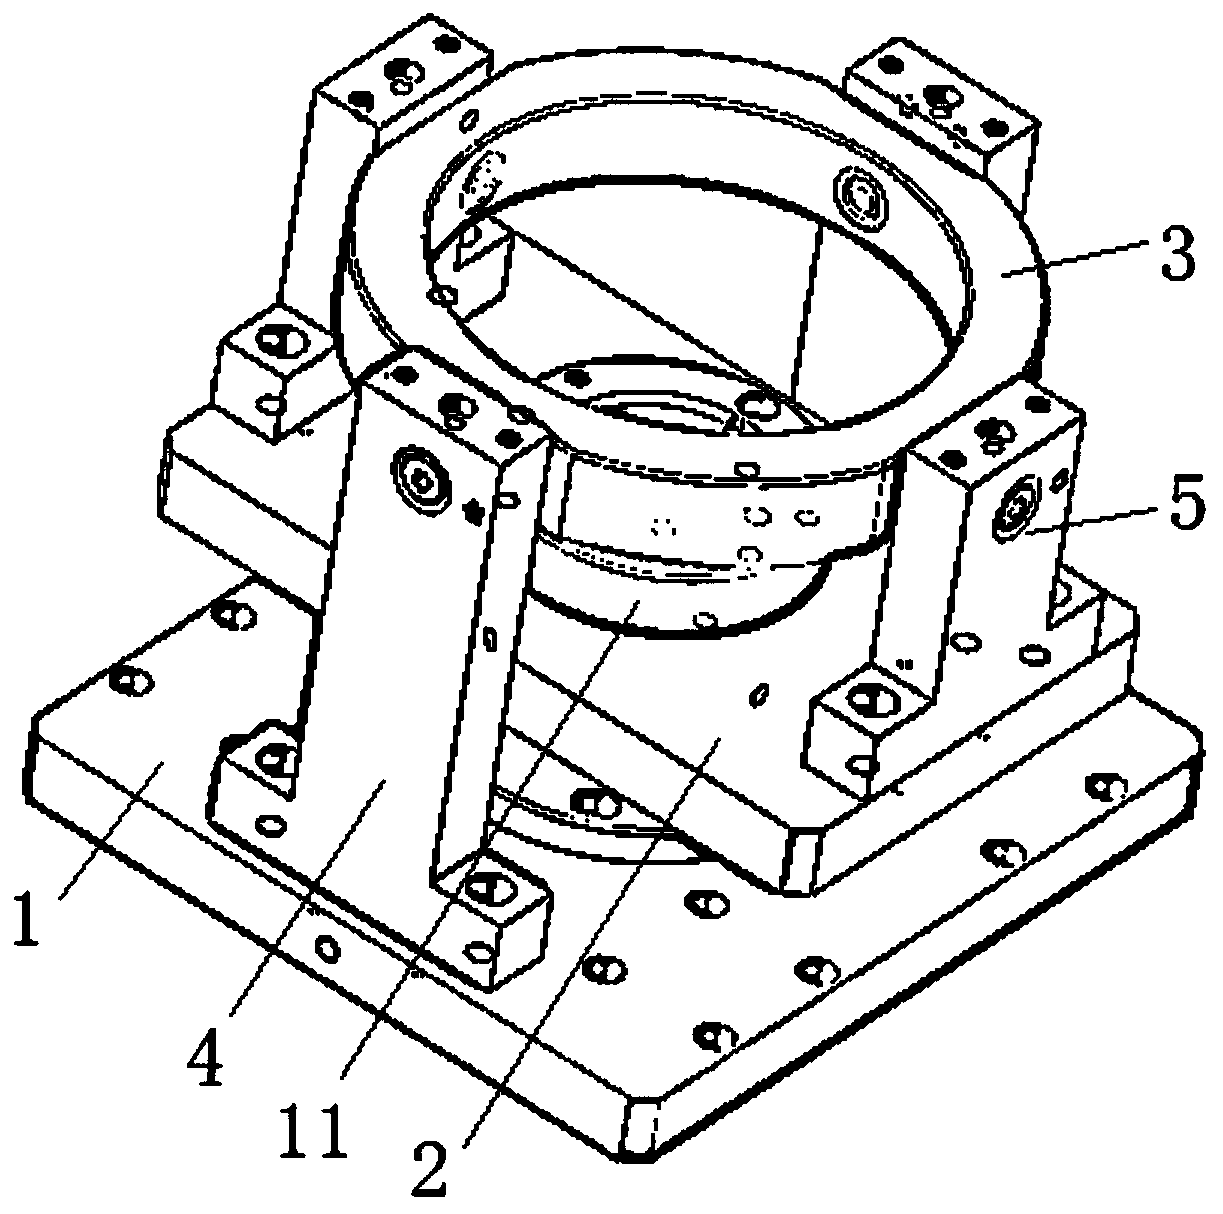 Self-centering floating clamp